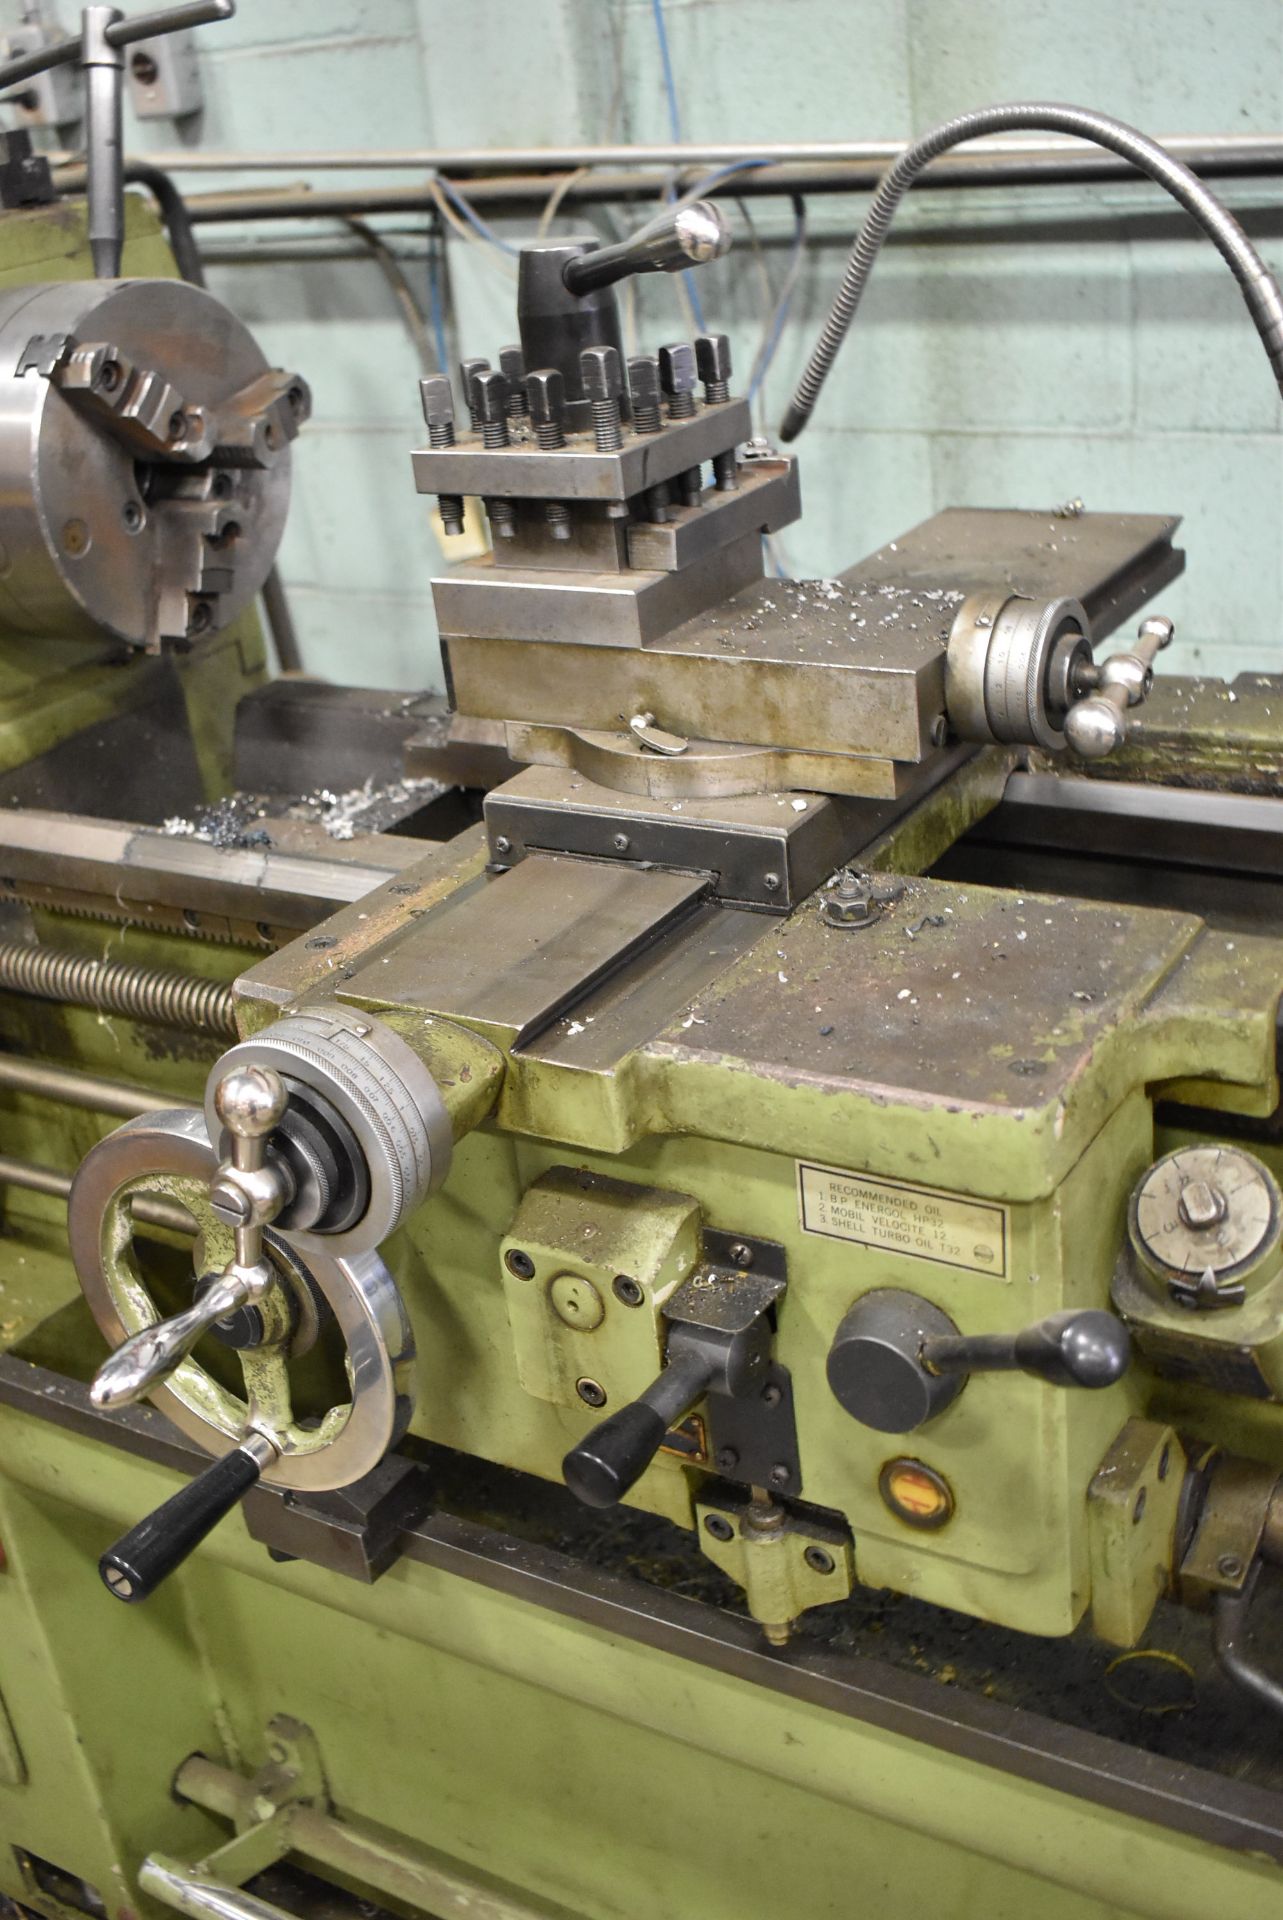 YAM YAM-10000 GAP BED ENGINE LATHE WITH 16" SWING OVER BED, 38" BETWEEN CENTERS, 1-3/4" BORE SIZE, - Image 6 of 9